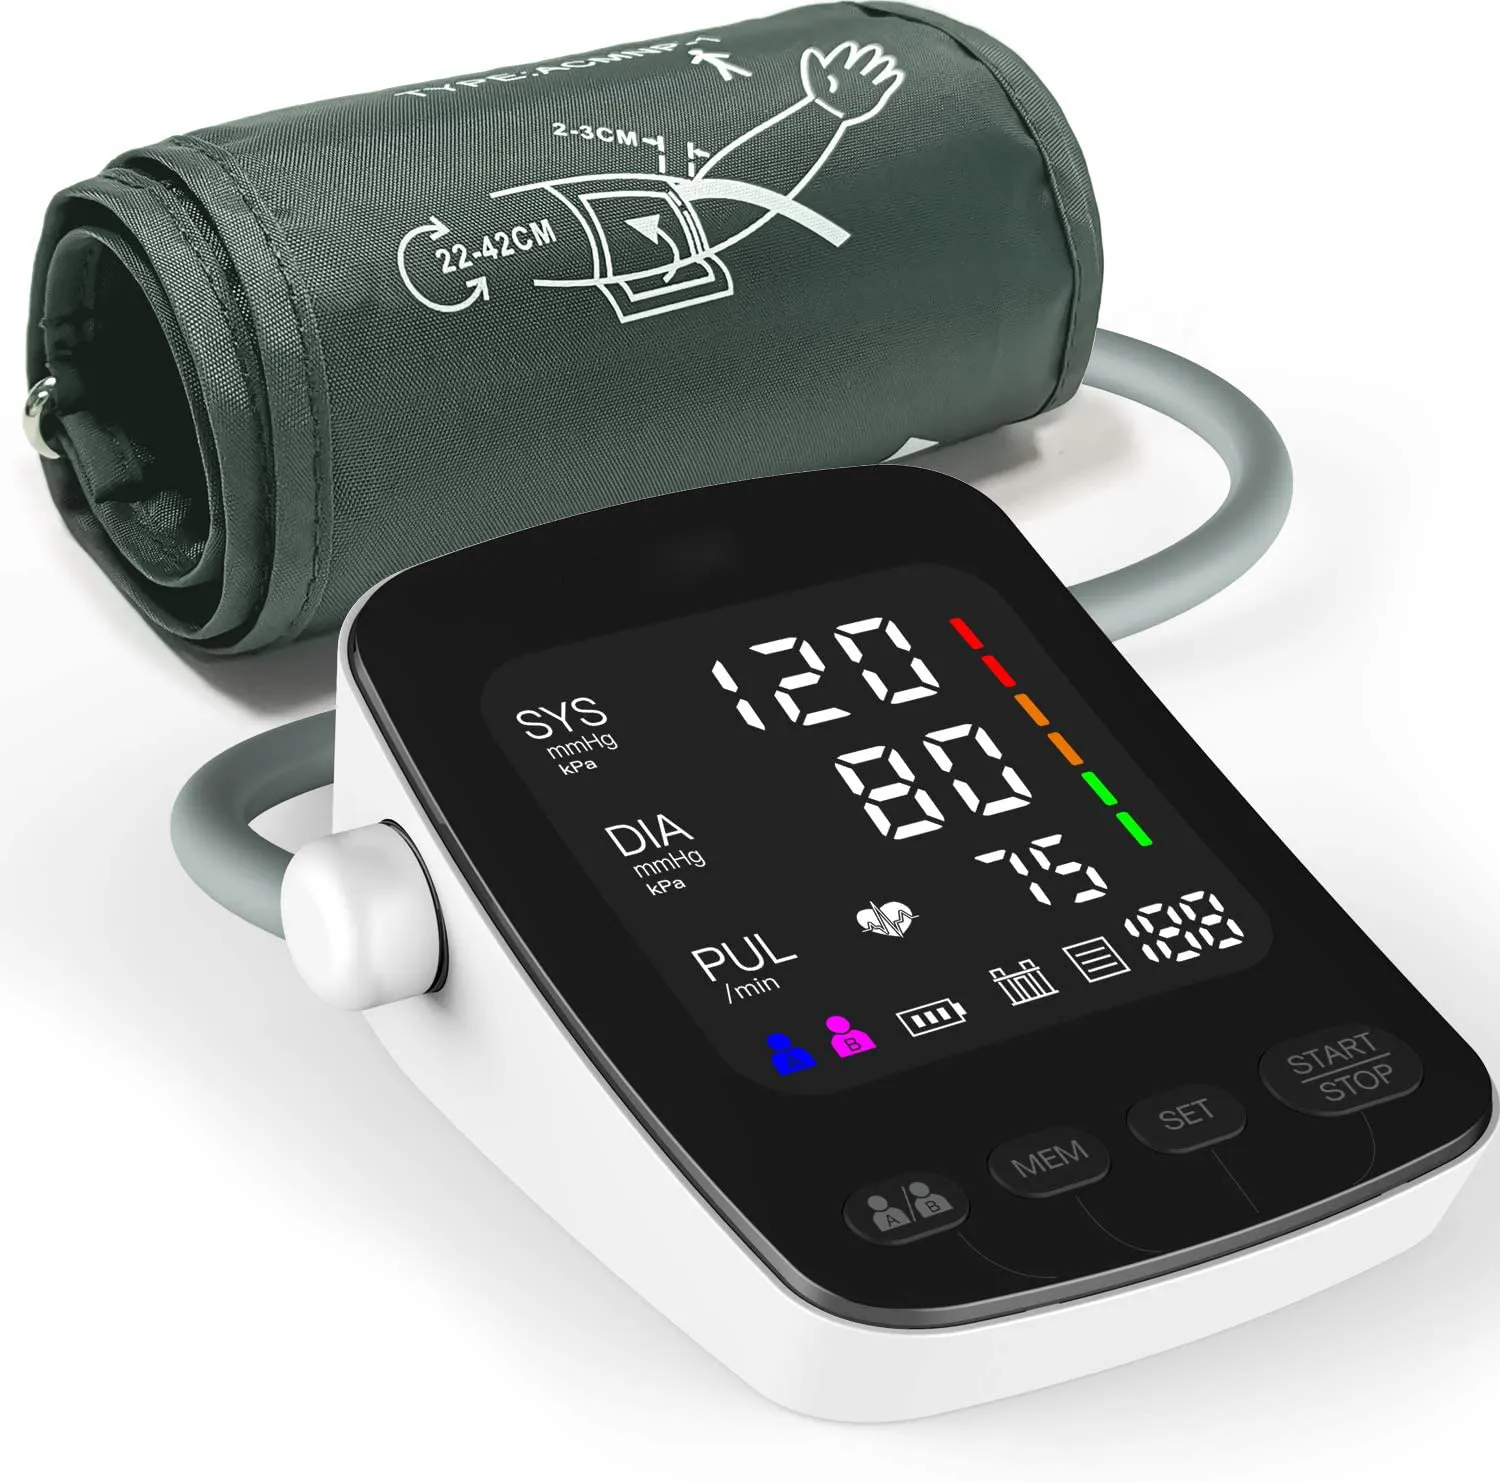 Customize The Sell Like Hot Cakes Style Automatic Arm Type Digital Blood Pressure Monitor